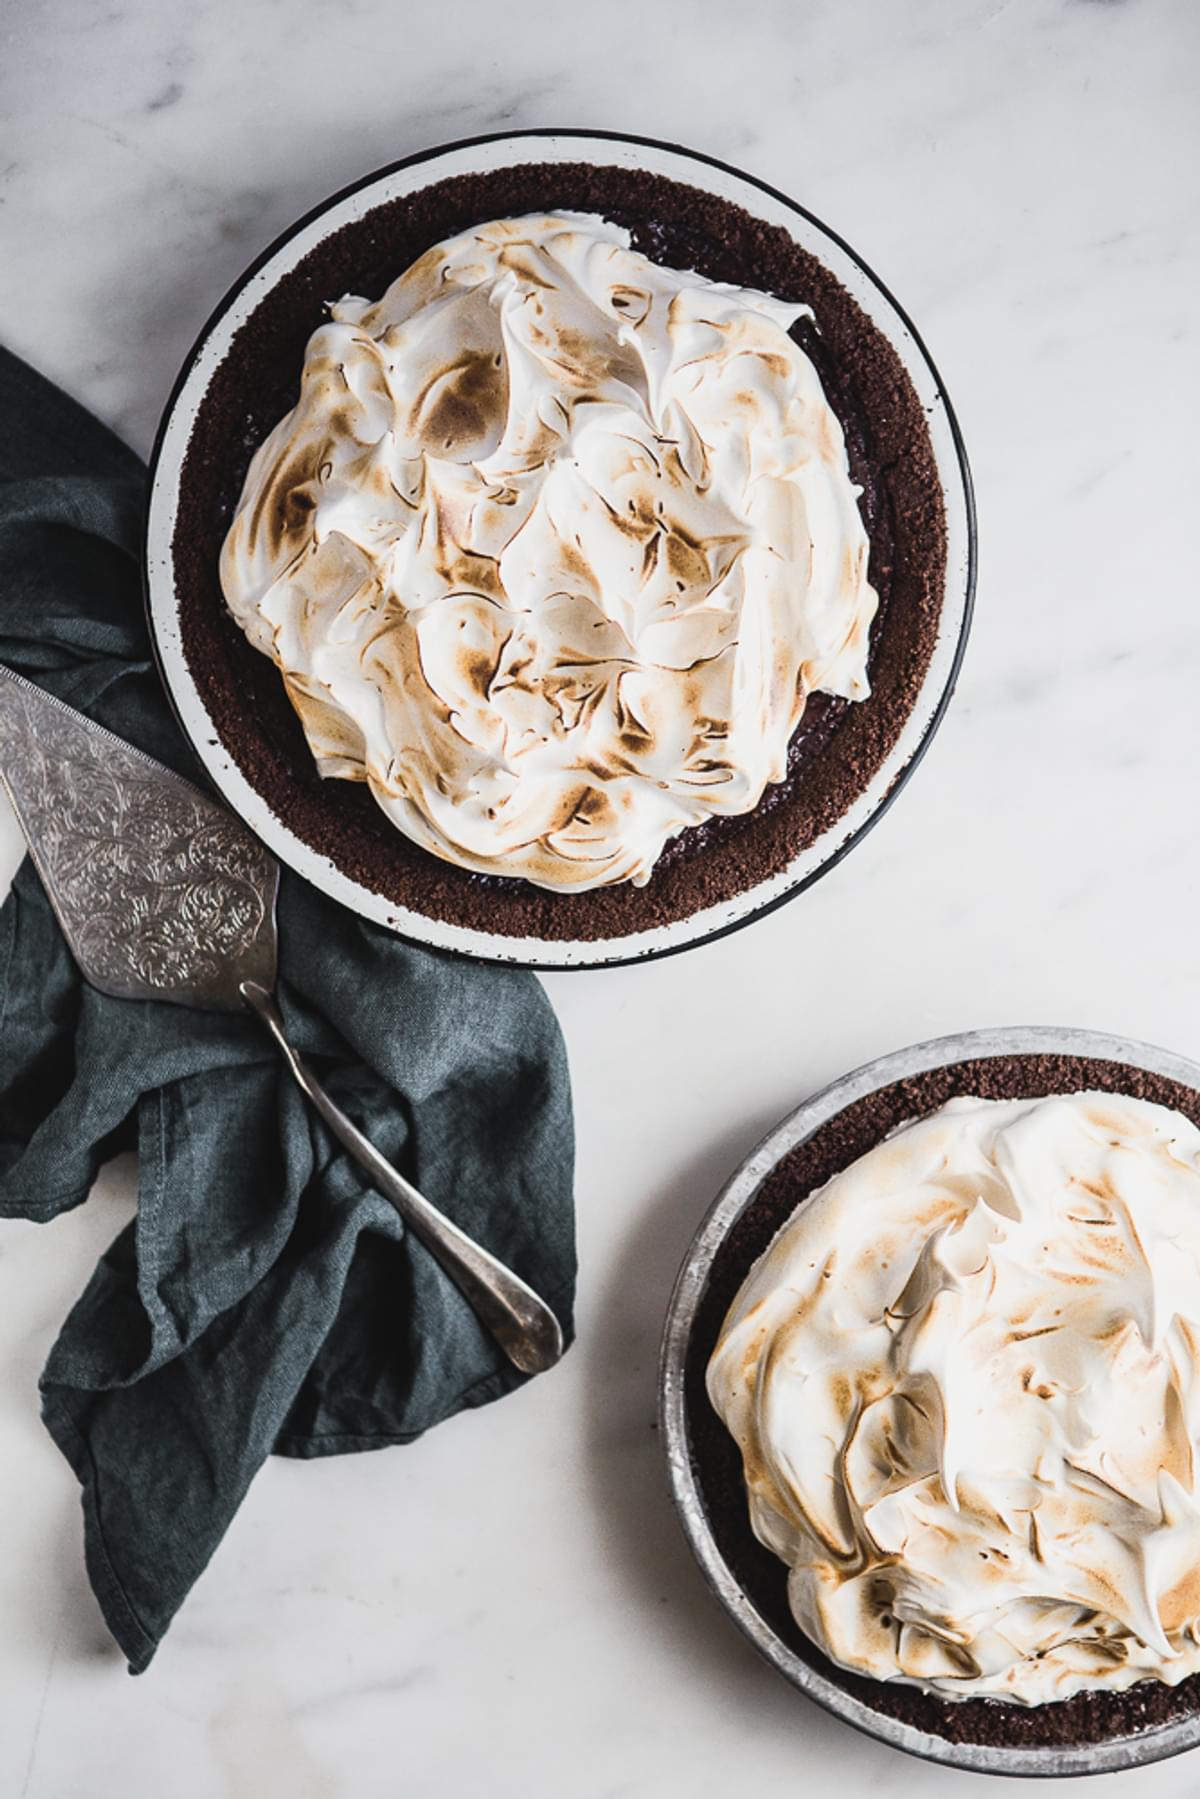 Chocolate and Whiskey Cream Pie with Toffee Meringue